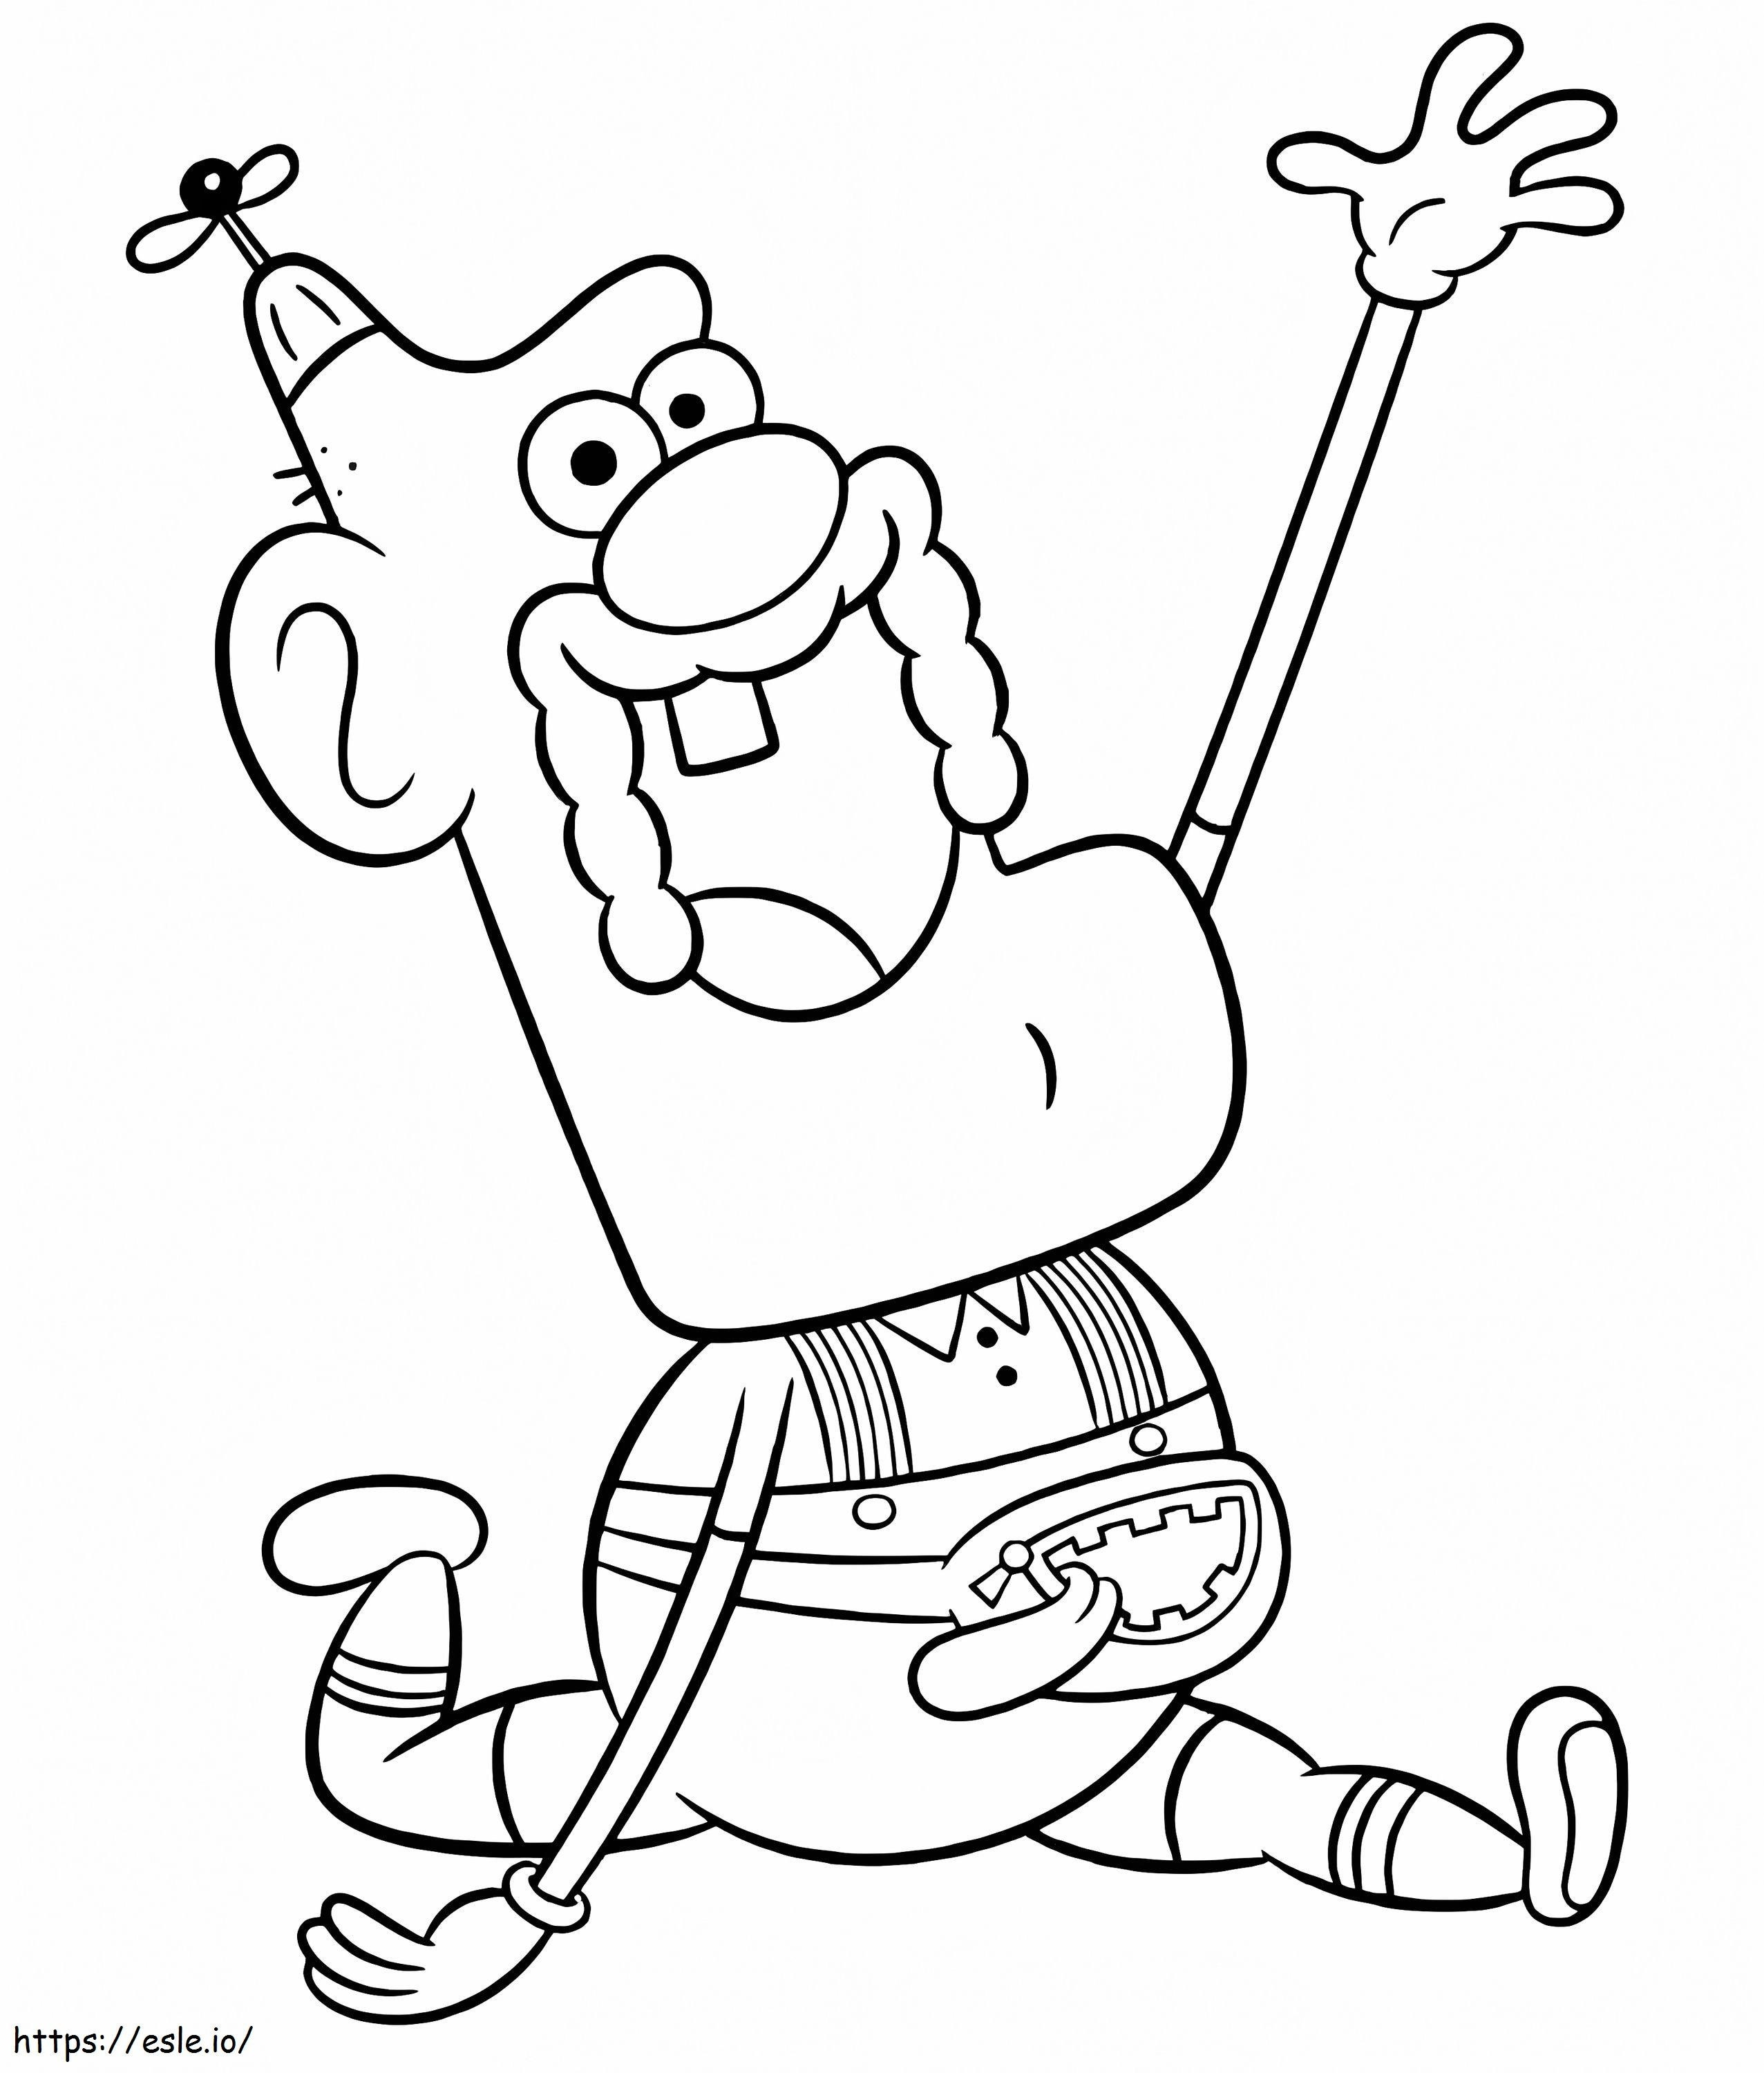 Friendly Uncle Grandpa coloring page